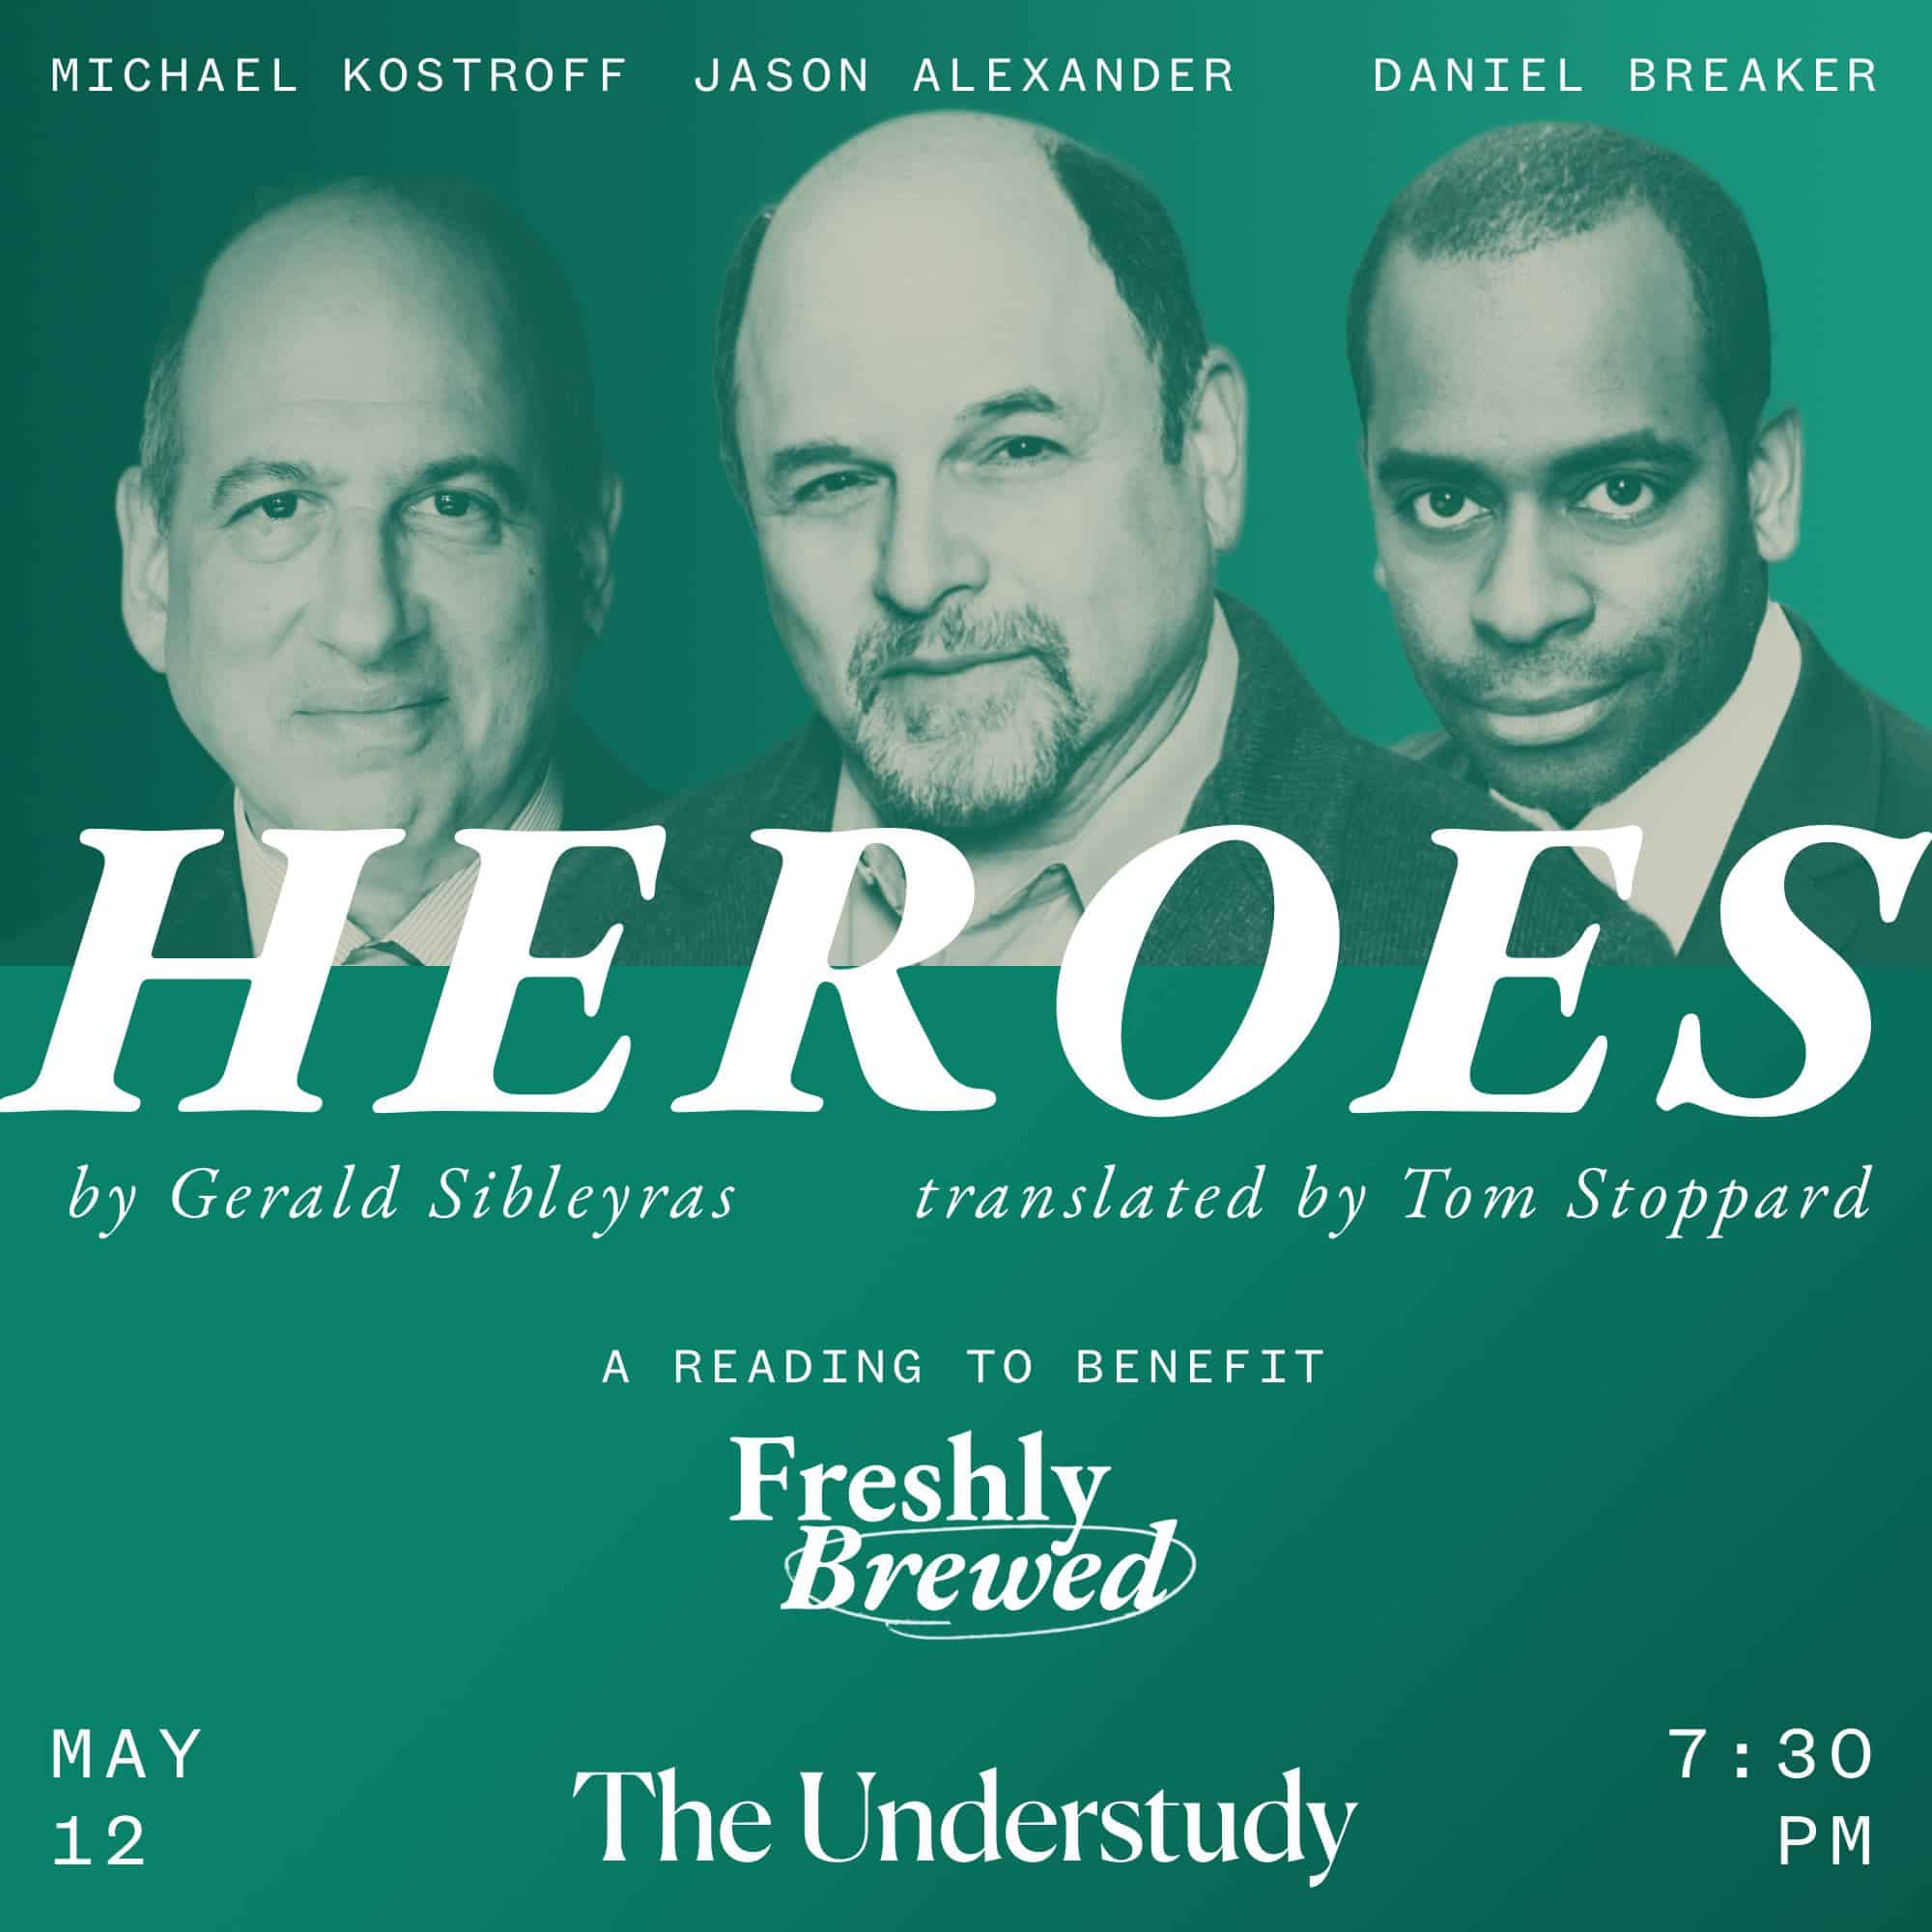 HEROES: A Reading to Benefit Freshly Brewed